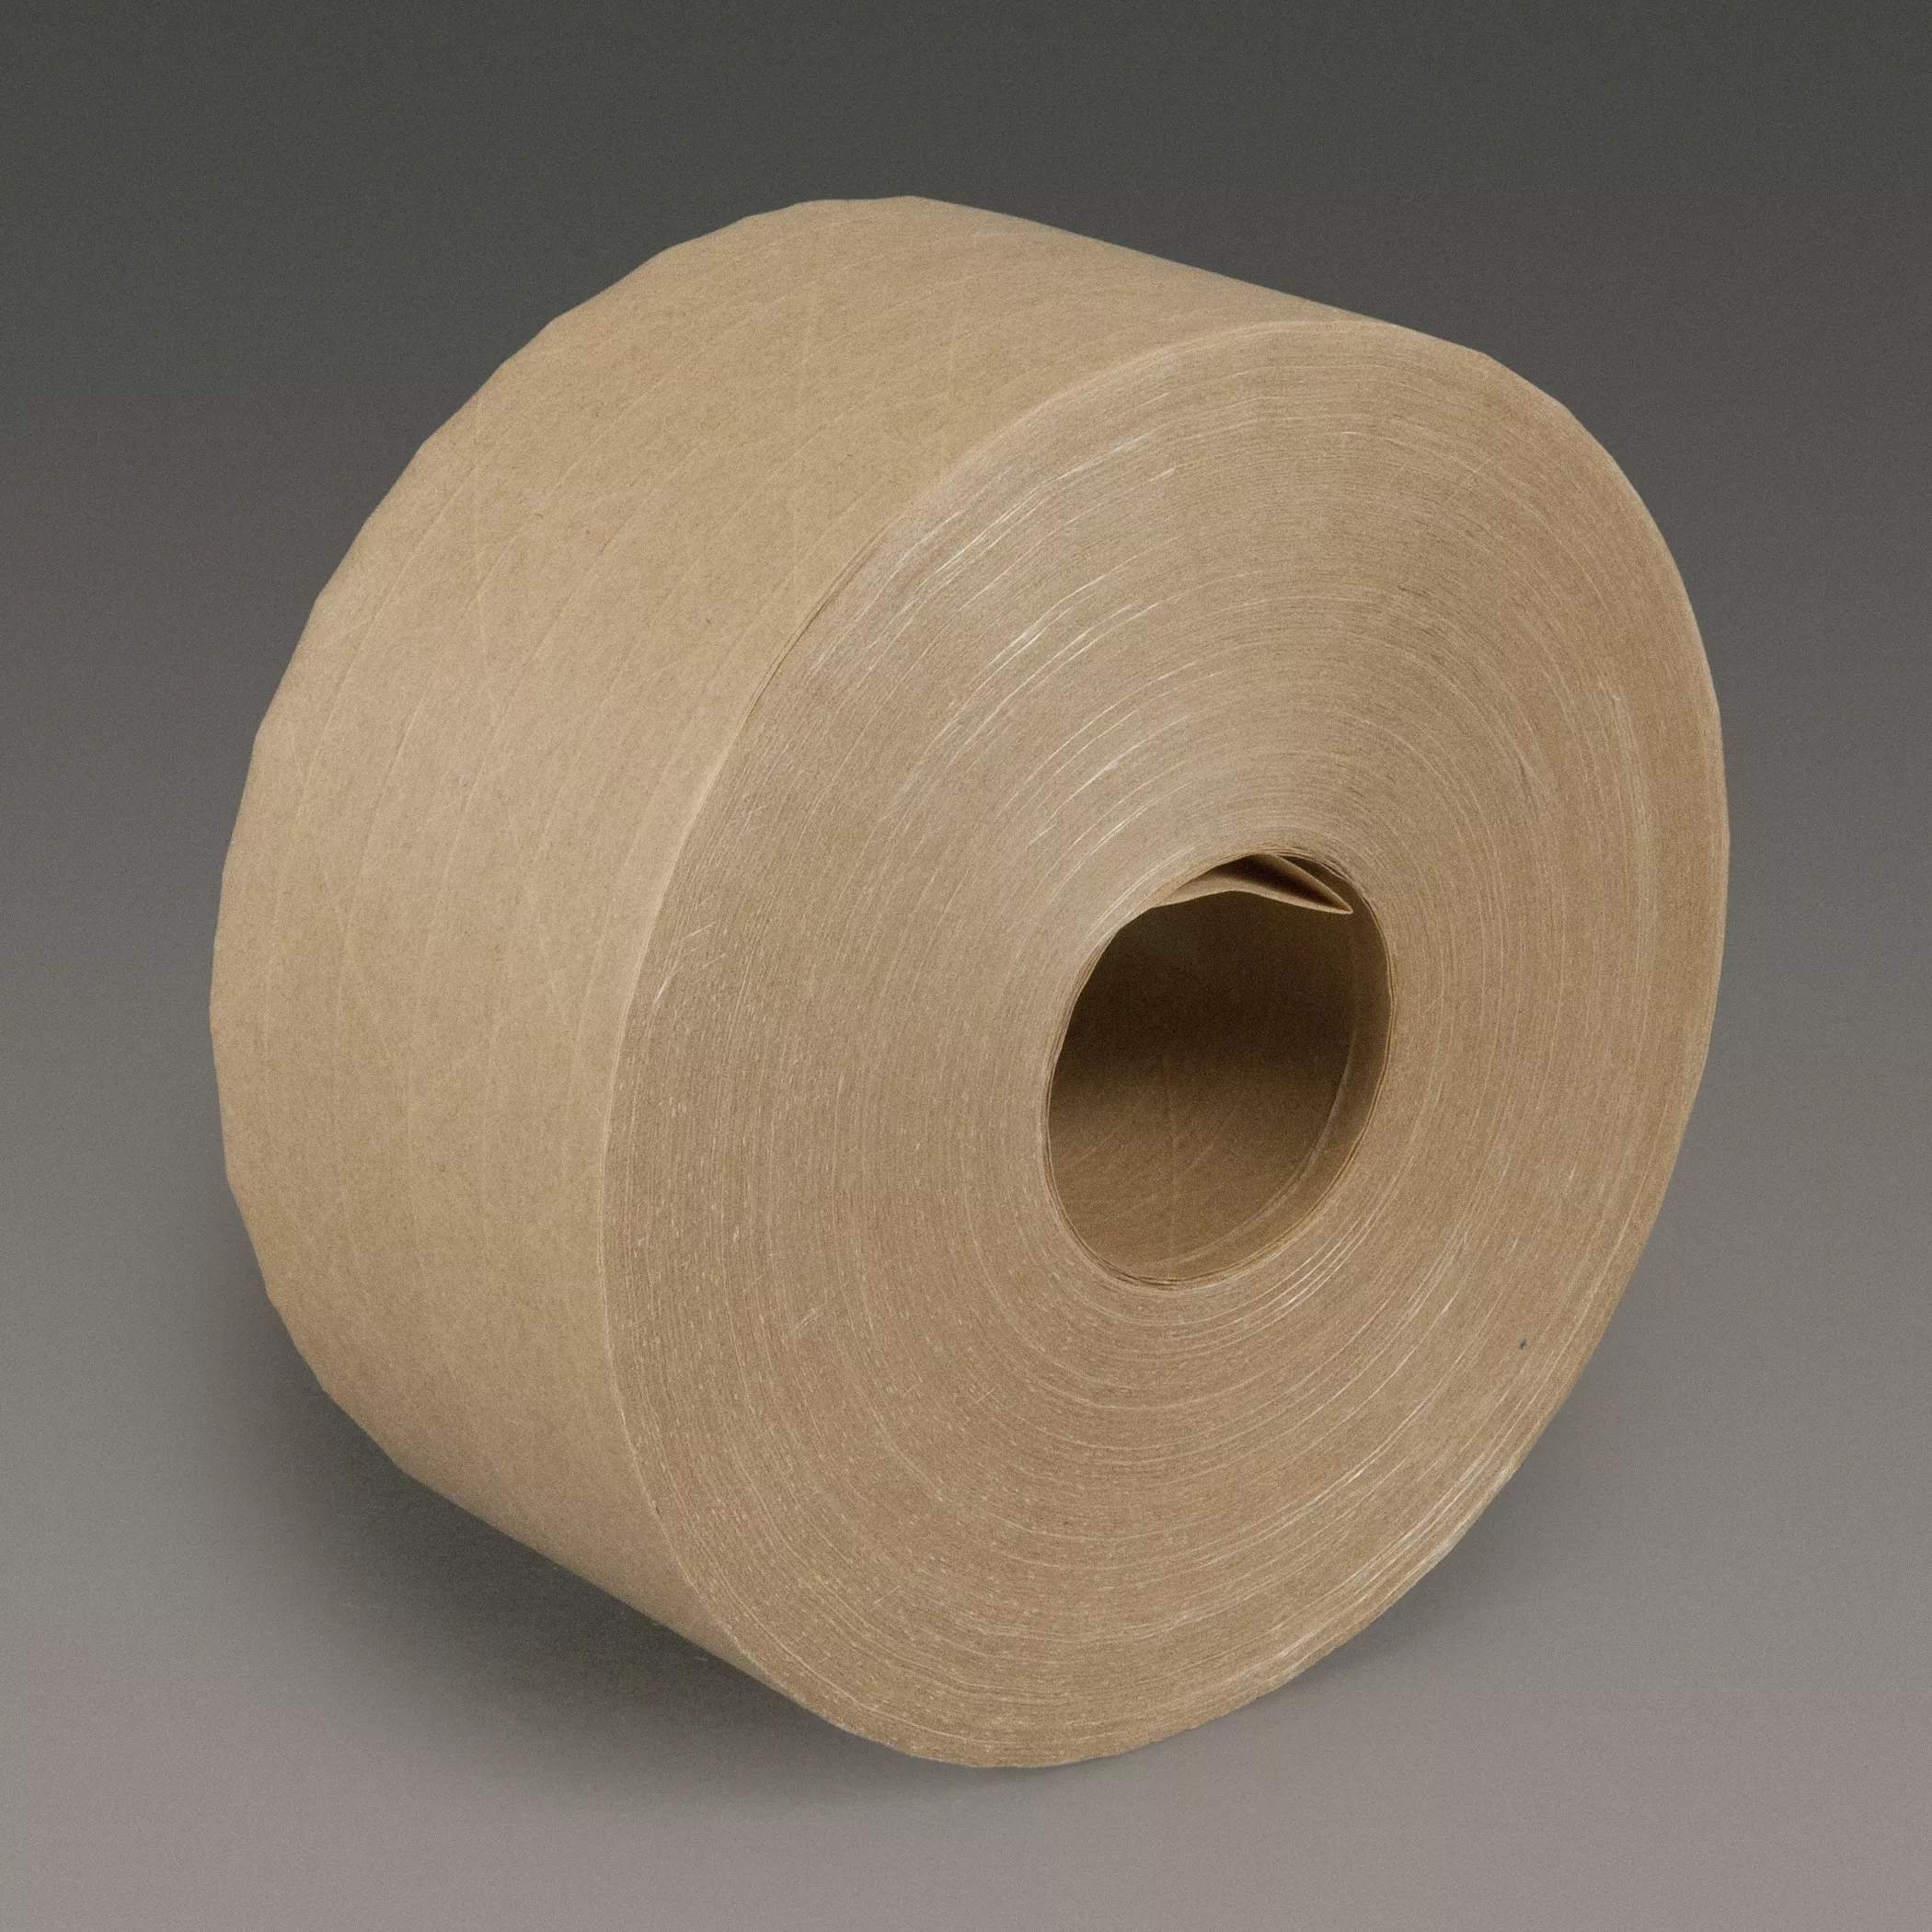 3M™ Water Activated Paper Tape 6145, Natural, Light Duty Reinforced, 72
mm x 450 ft, 10/Case